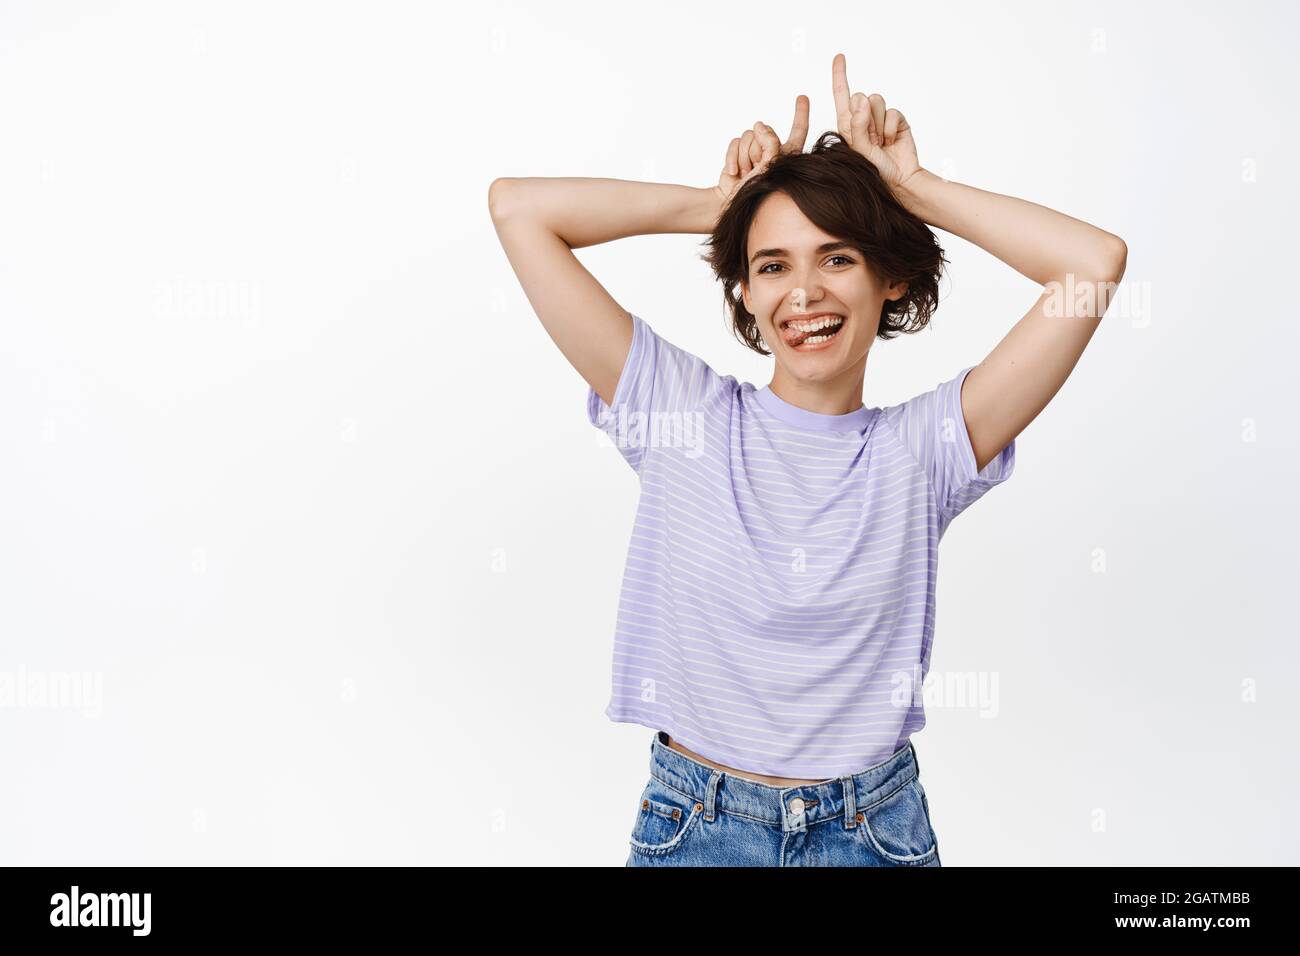 Funny and happy young woman showing bull devil horns gesture, fingers on head pointing up, smiling and laughing, standing over white background Stock Photo